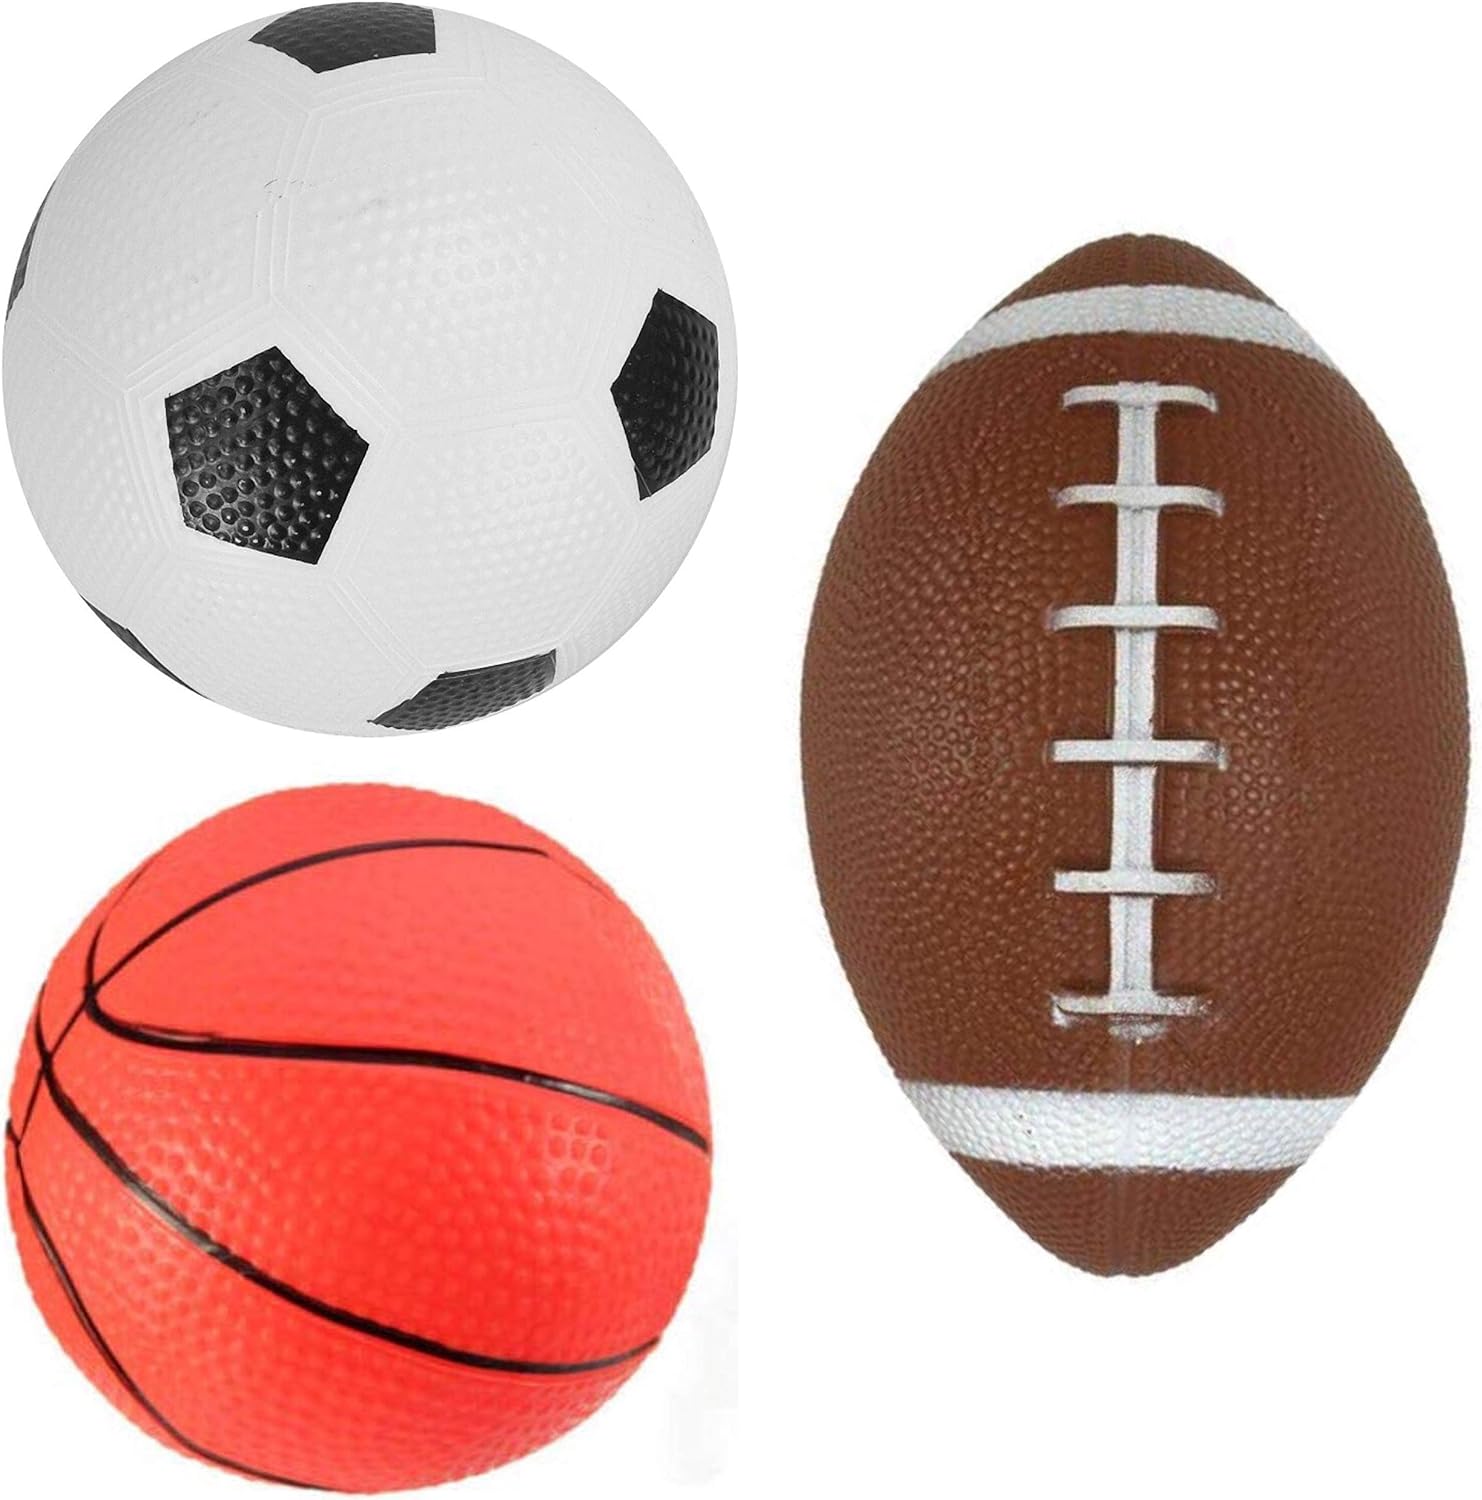 ADEPTNA Soft Inflated Mini Sports Balls Pack of 3 - American Football Rugby Balls Football and Basketball – Indoor Outdoor Soft Toys Children's Activities Fun